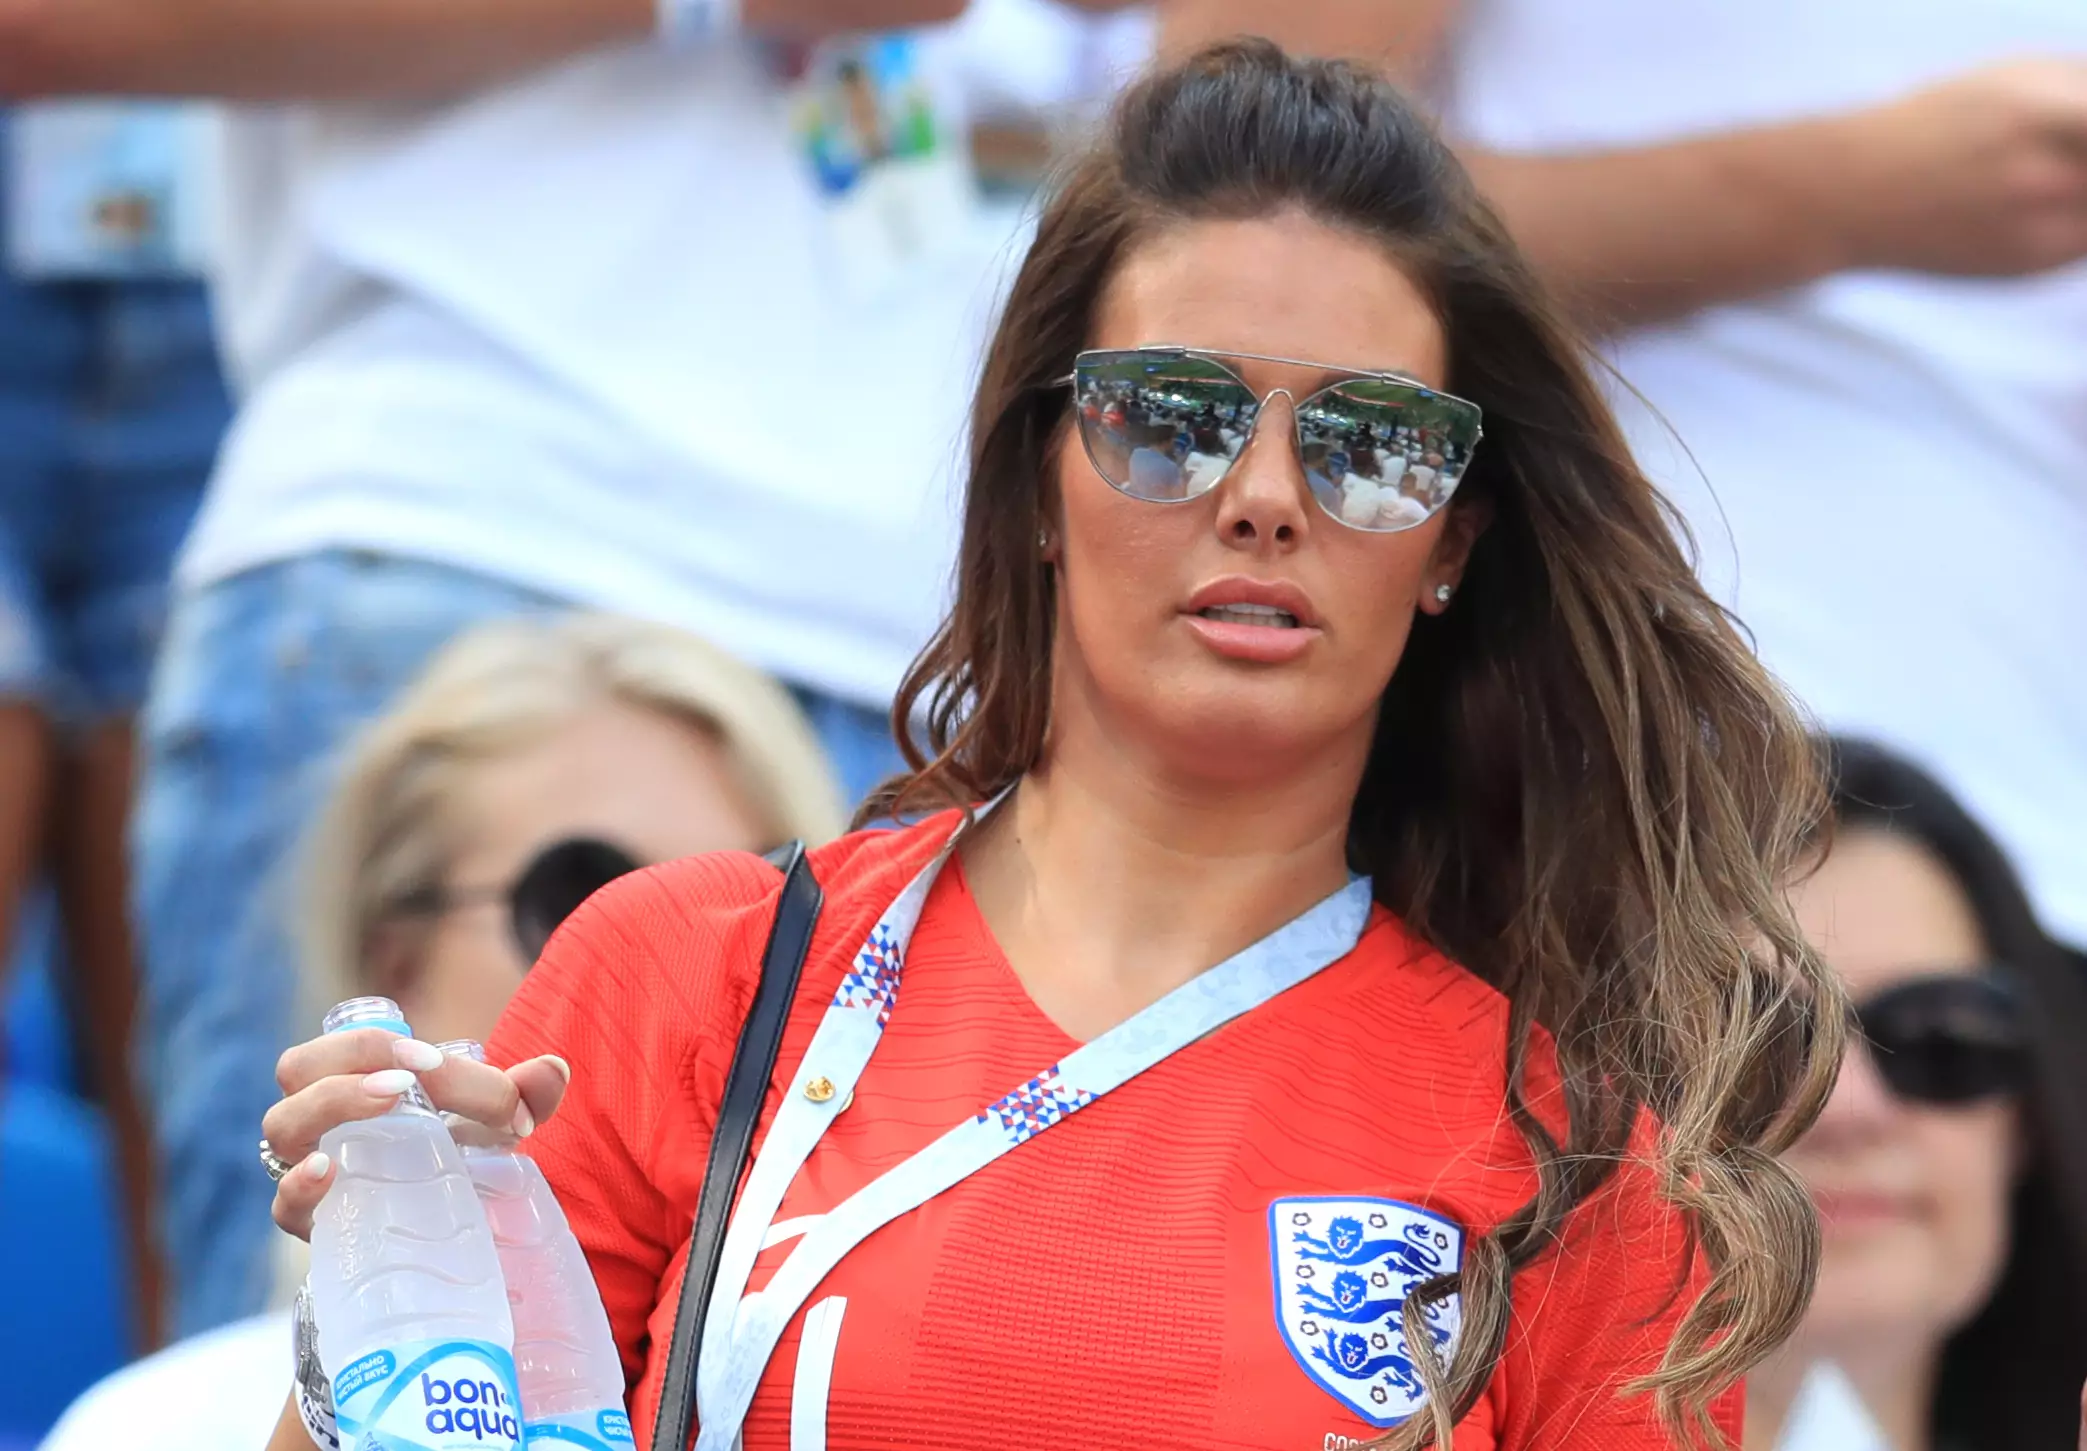 Rebekahs can don an England or a Leicester City football shirt, as the WAG often does in support of her husband. (